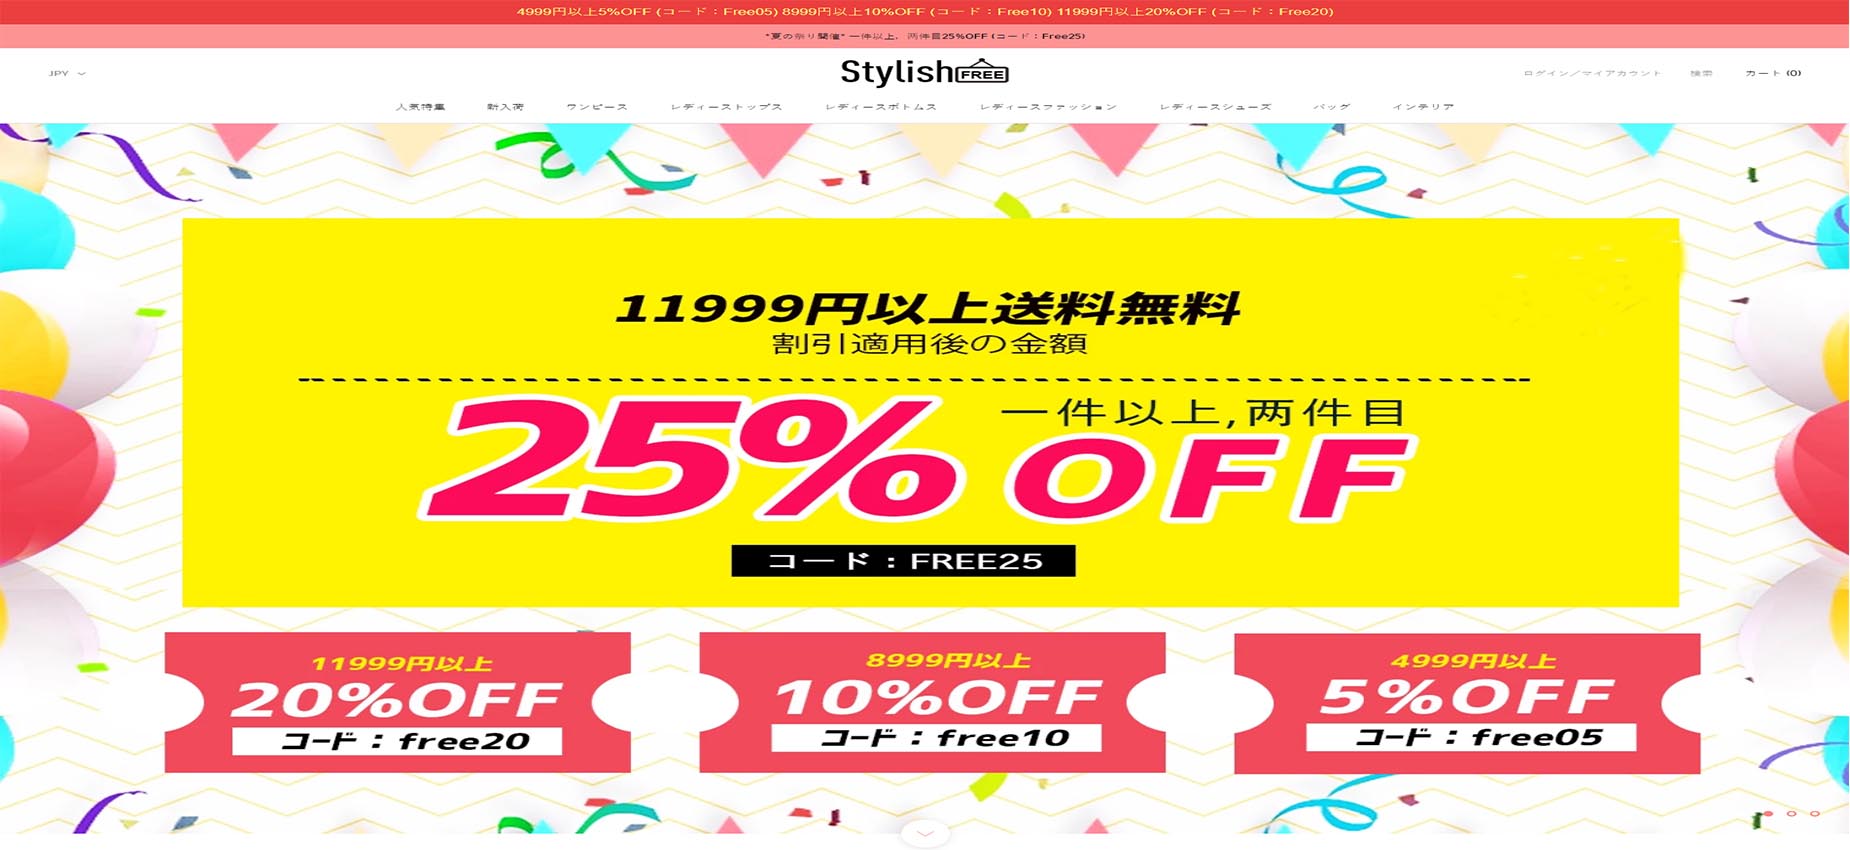 Stylishfree Affiliate Program With Incredible Earning 20% (Exclusive)! - Mopubi.com